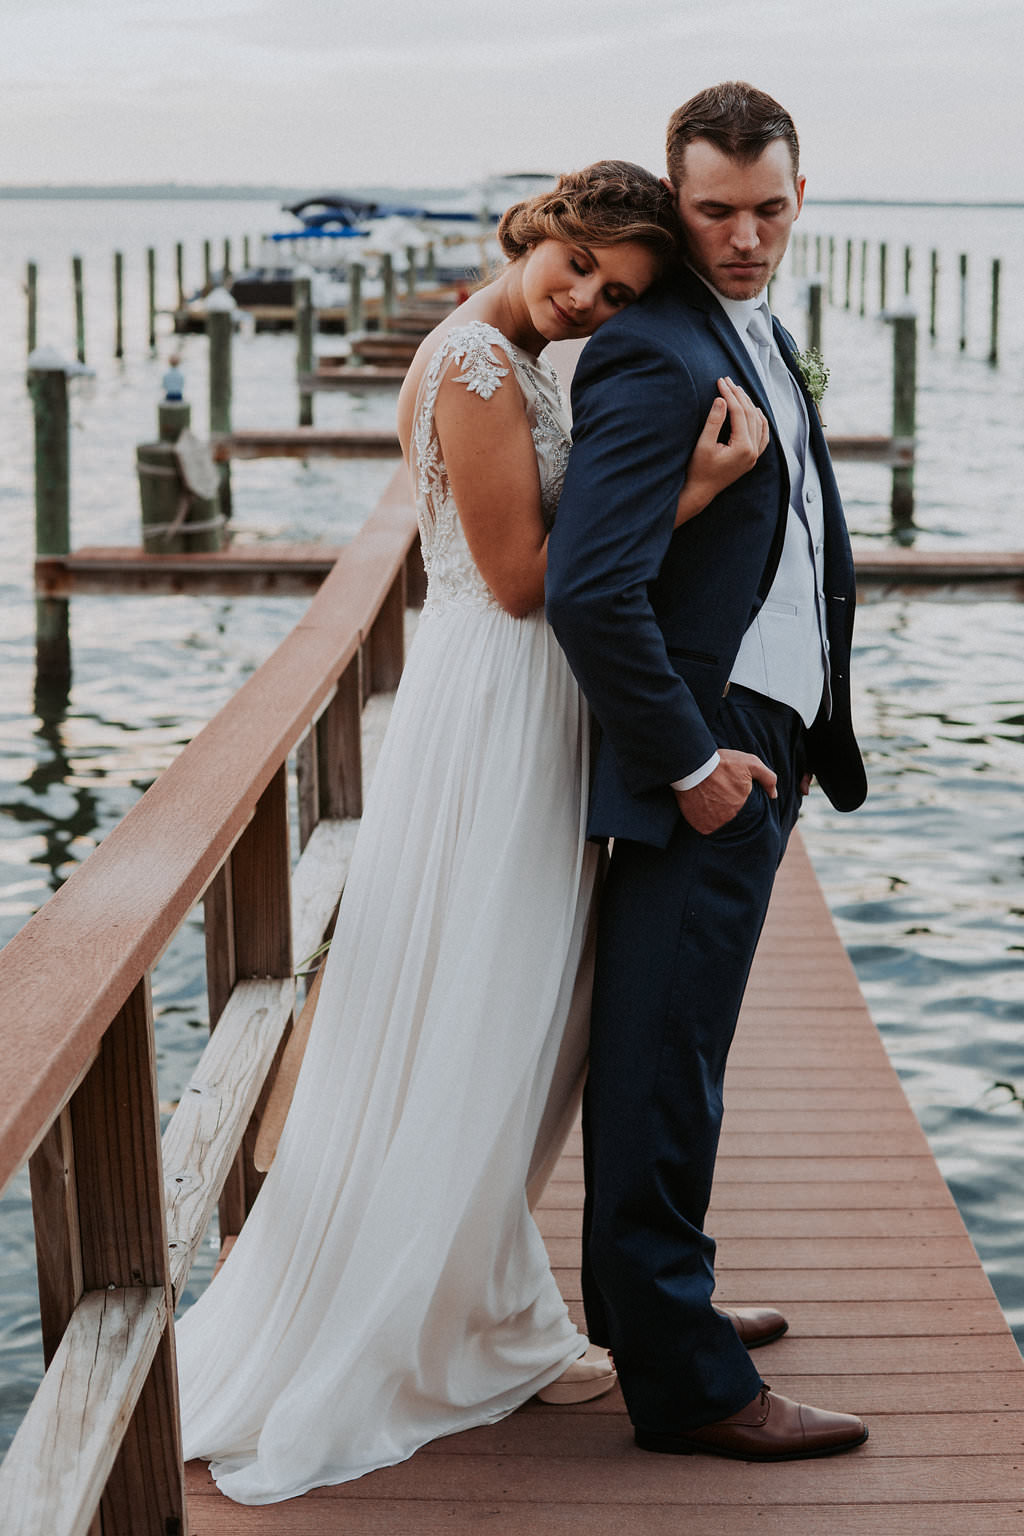 Outdoor Portrait on Waterfront Dock, Bride wearing Jeweled Lace Drop Back A Line Wedding Dress, Groom in Navy Suit with Silver Vest from Tampa Bay Formalwear Shop Nikki's Glitz and Glam | Dunedin, Florida Waterfront Wedding Venue Beso Del Sol Resort | Tampa Bay Wedding Photographer Grind and Press Photography